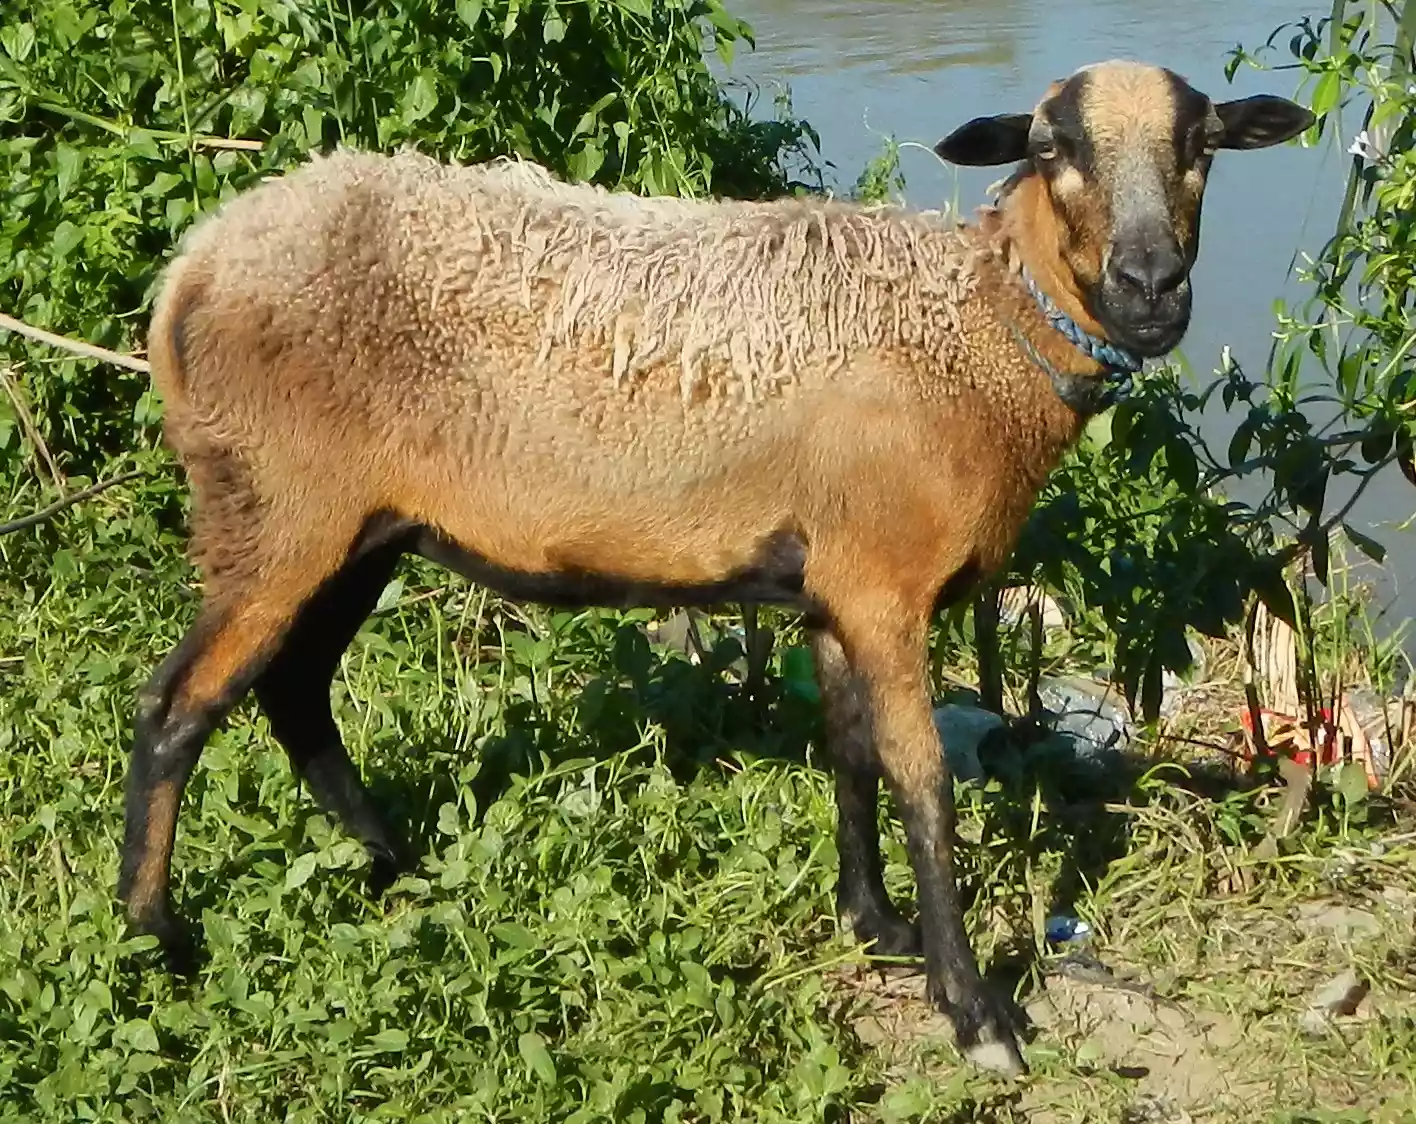 a sheep-goat hybrid with longish brown coat stares at camera